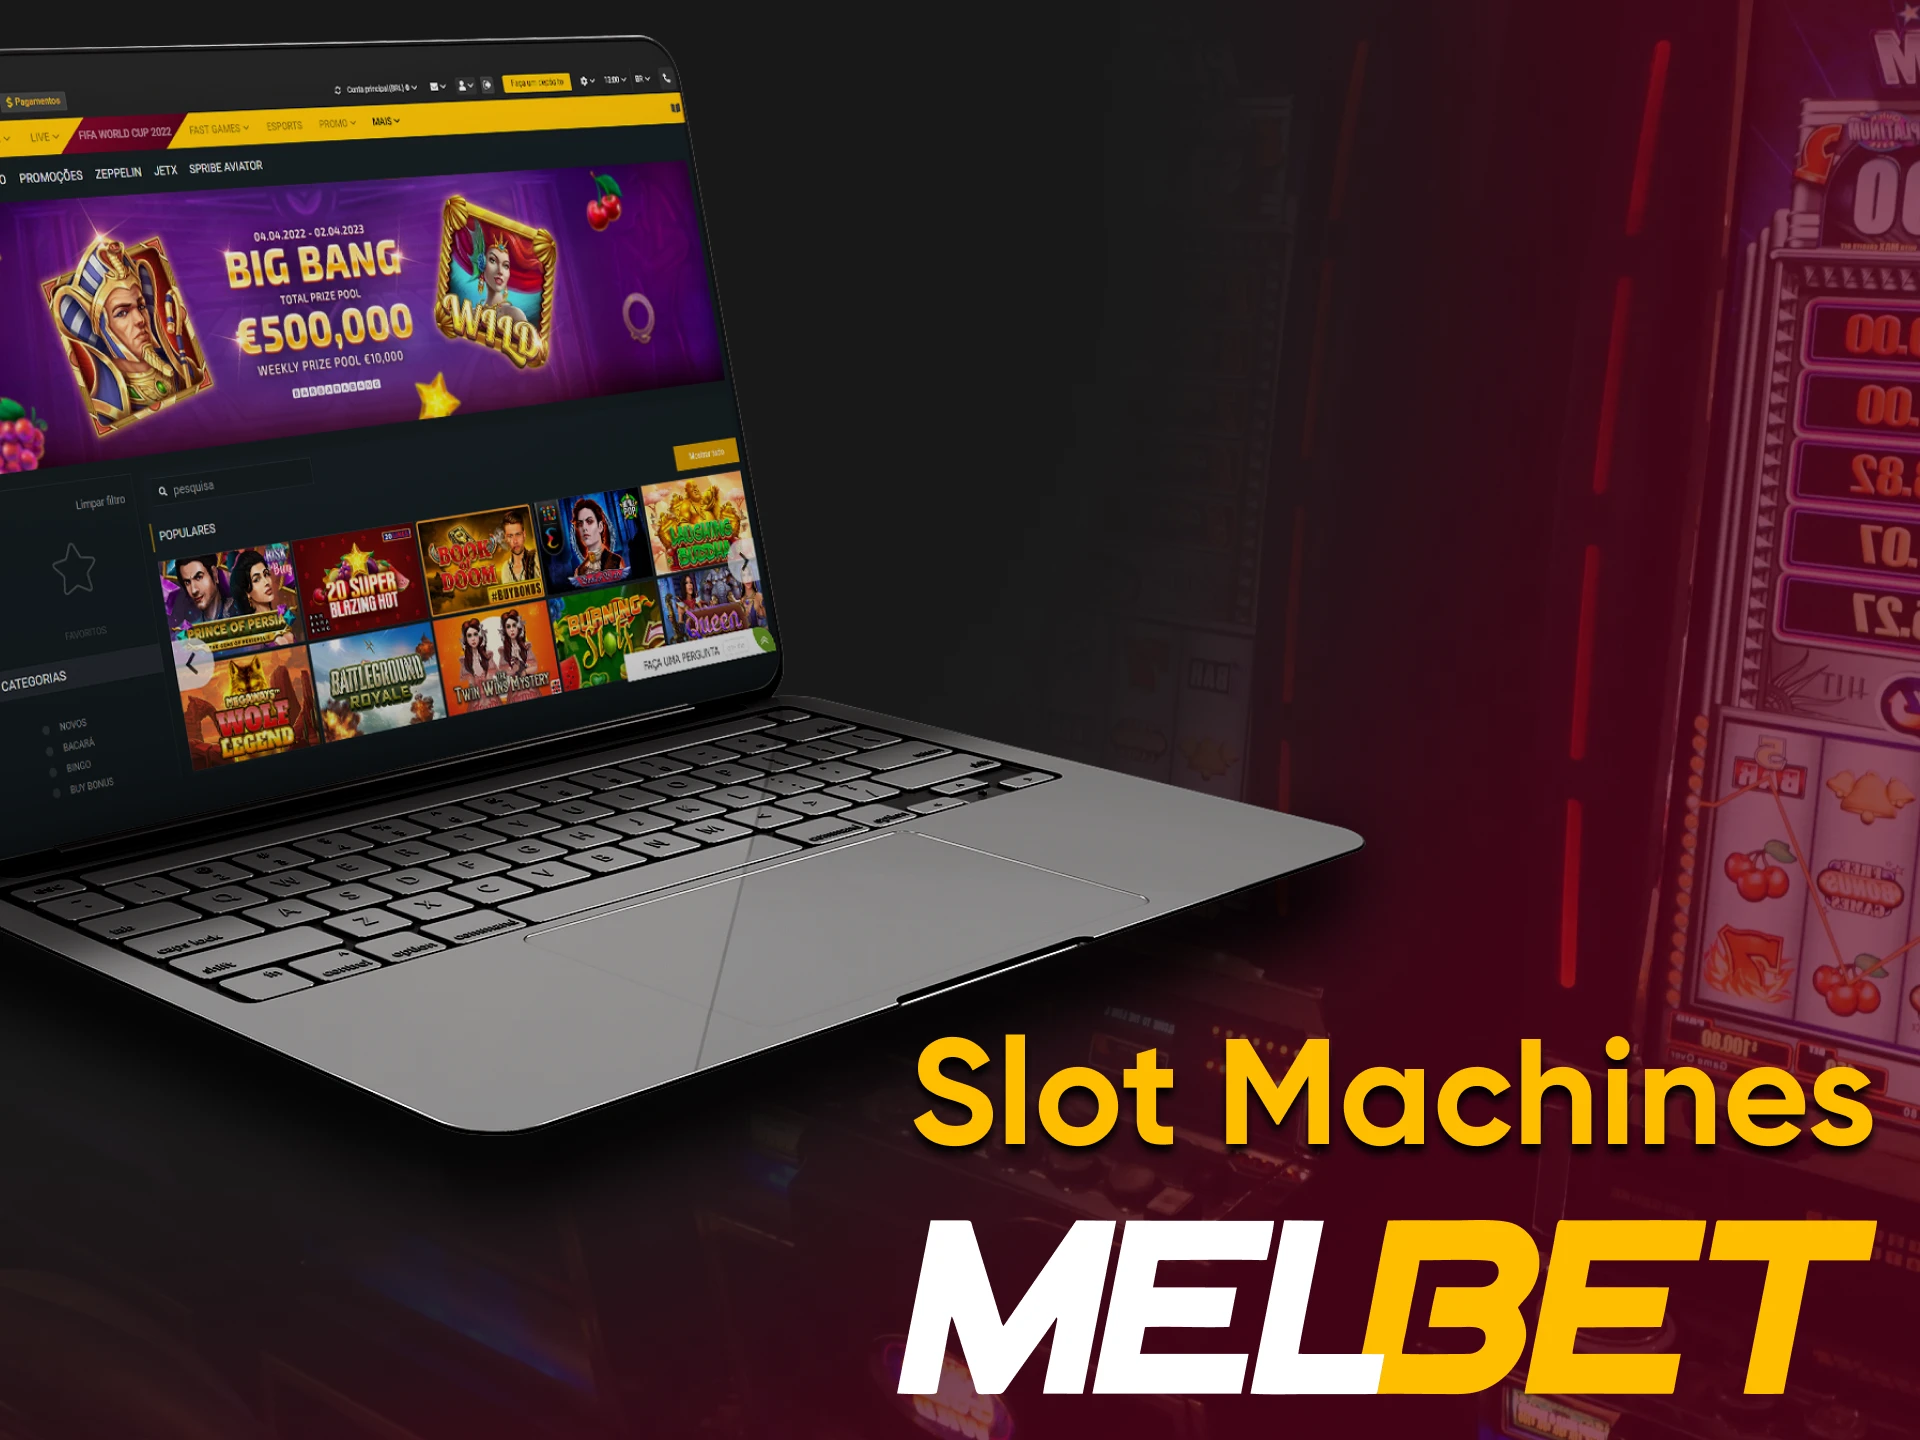 The Melbet website has a Slot section.